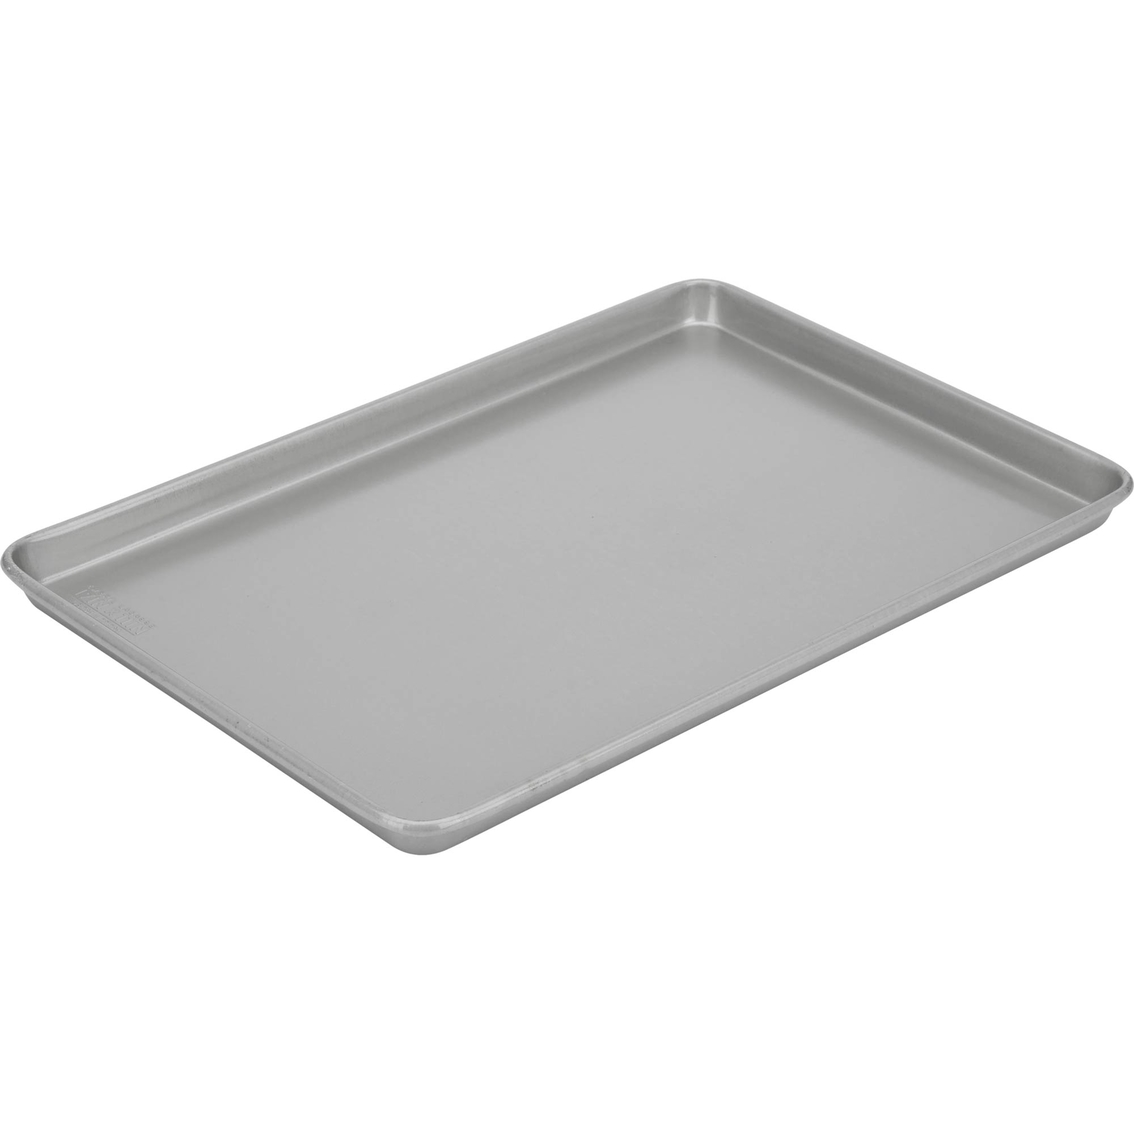 Emeril Lagasse Aluminized Steel Nonstick large cookie sheet 17in x 11in 